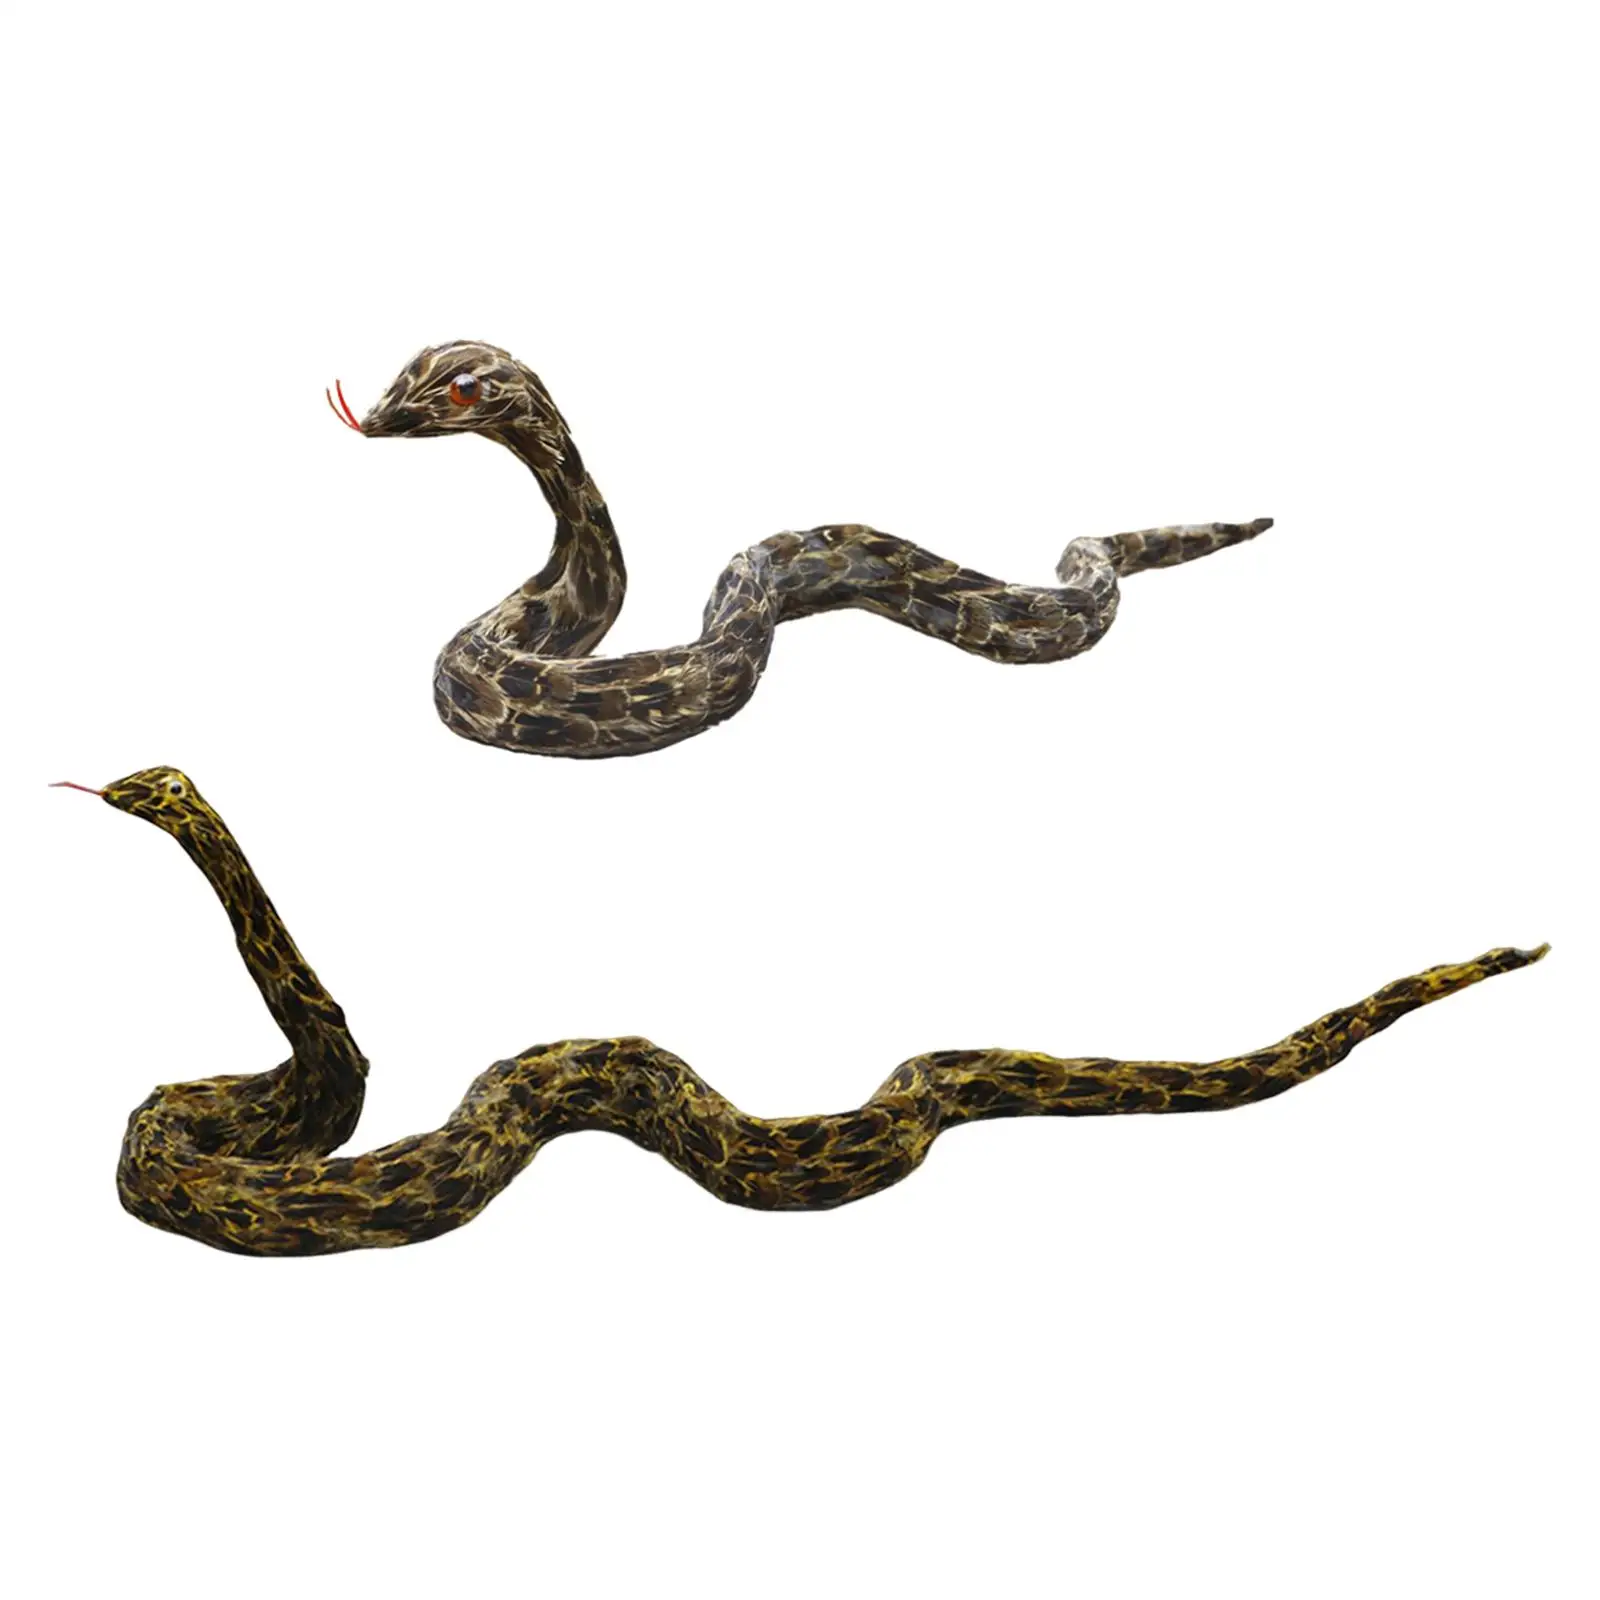 Simulation Snake Model Toy Practical Jokes Prop Party Favor Educational Toys